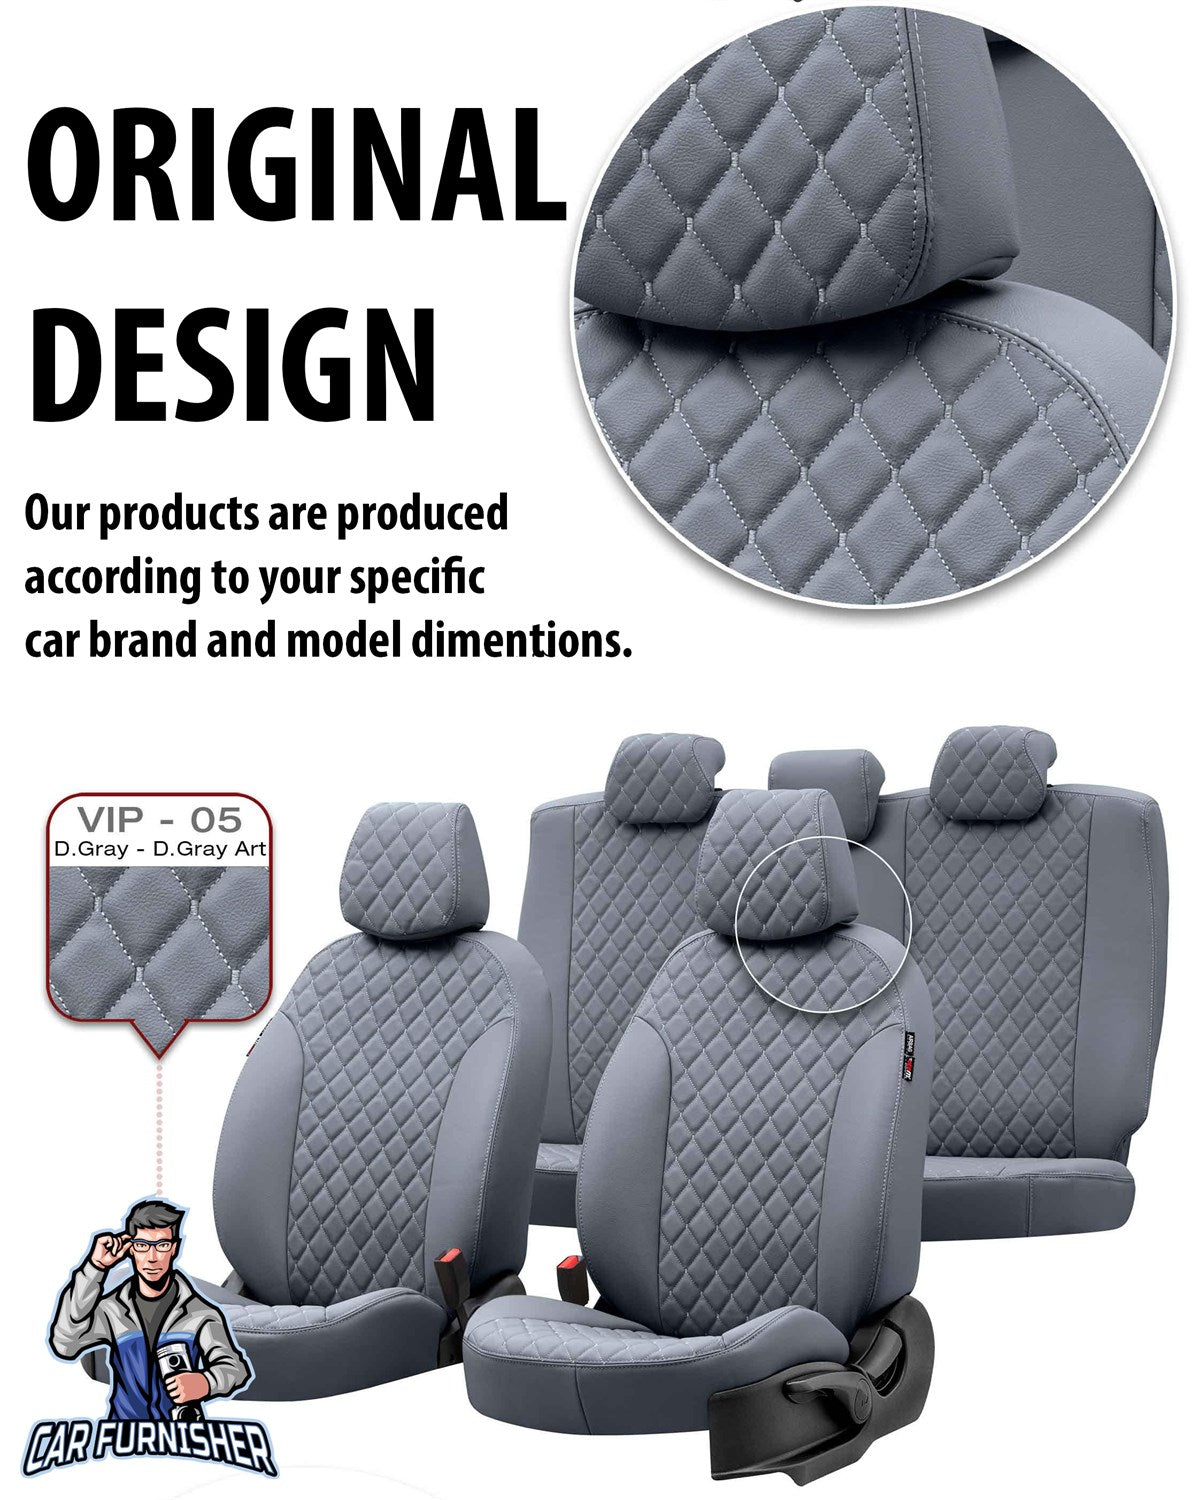 Landrover Freelander Car Seat Covers 1998-2012 Madrid Design Smoked Leather